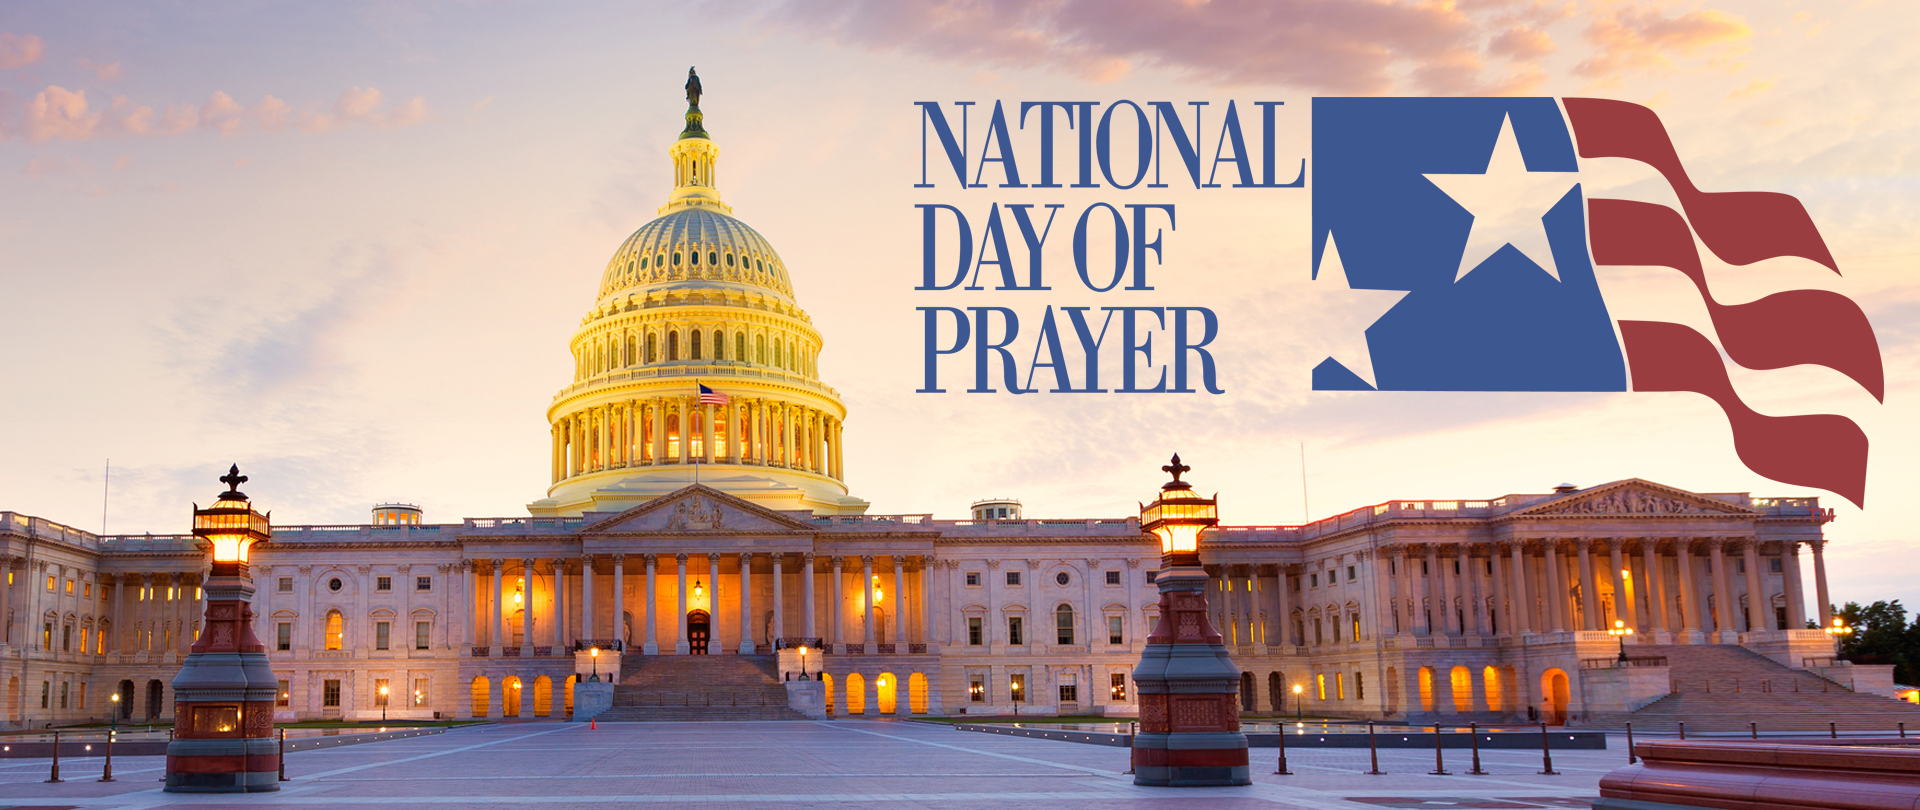 National Day of Prayer
Thursday, May 2
7:00 AM–5:00 PM, Chapel
Drop in anytime!
